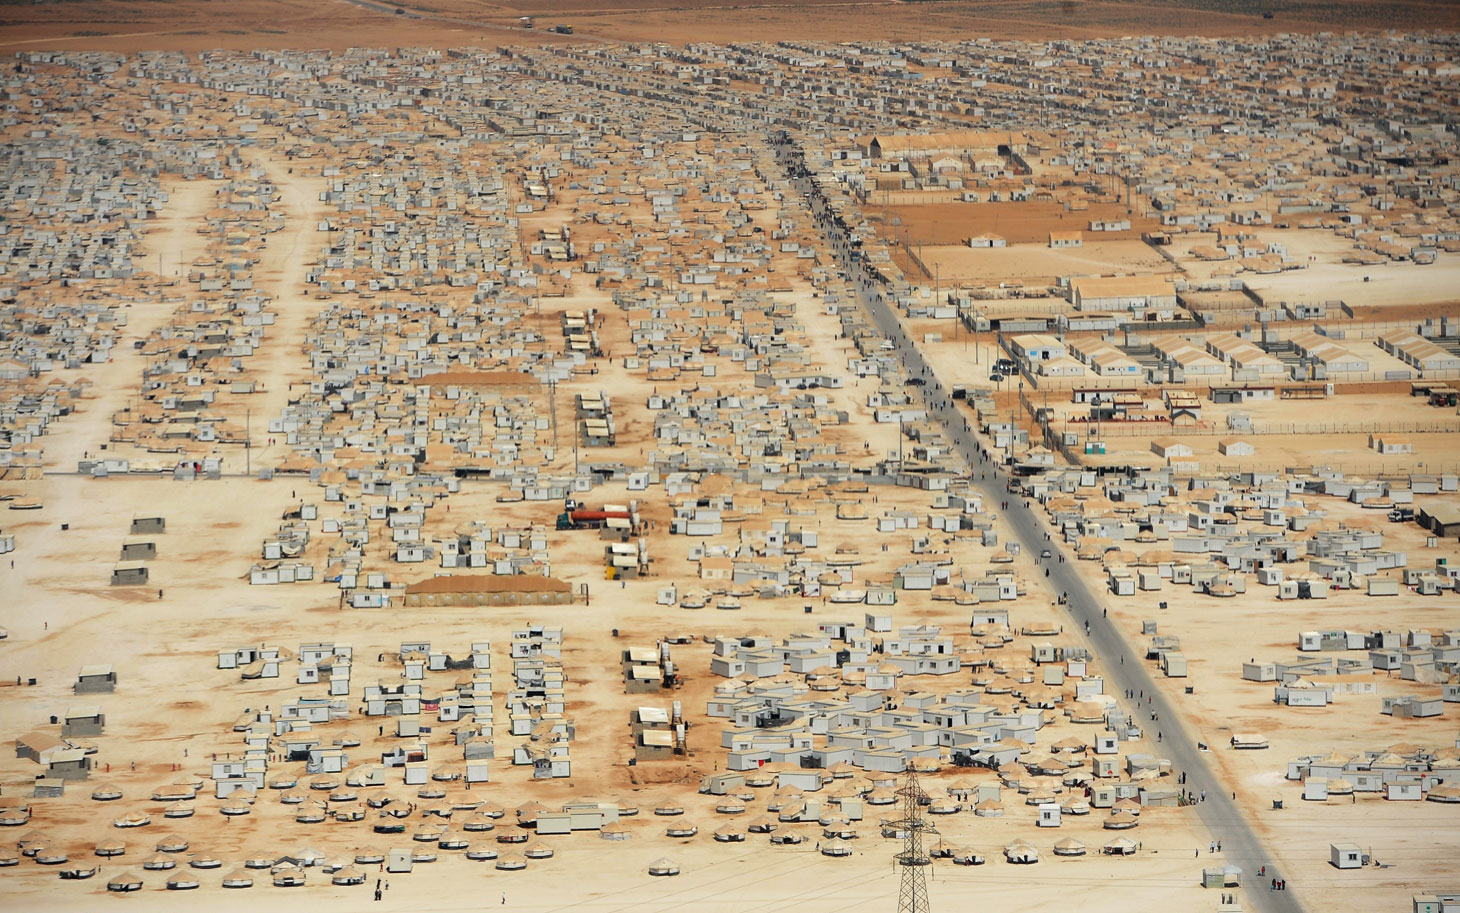 An aerial view shows the Zaatari refugee camp on July 18, 2013 near the Jordanian-Syrian border. The northern Jordanian Zaatari refugee camp is home to 115,000 Syrians.